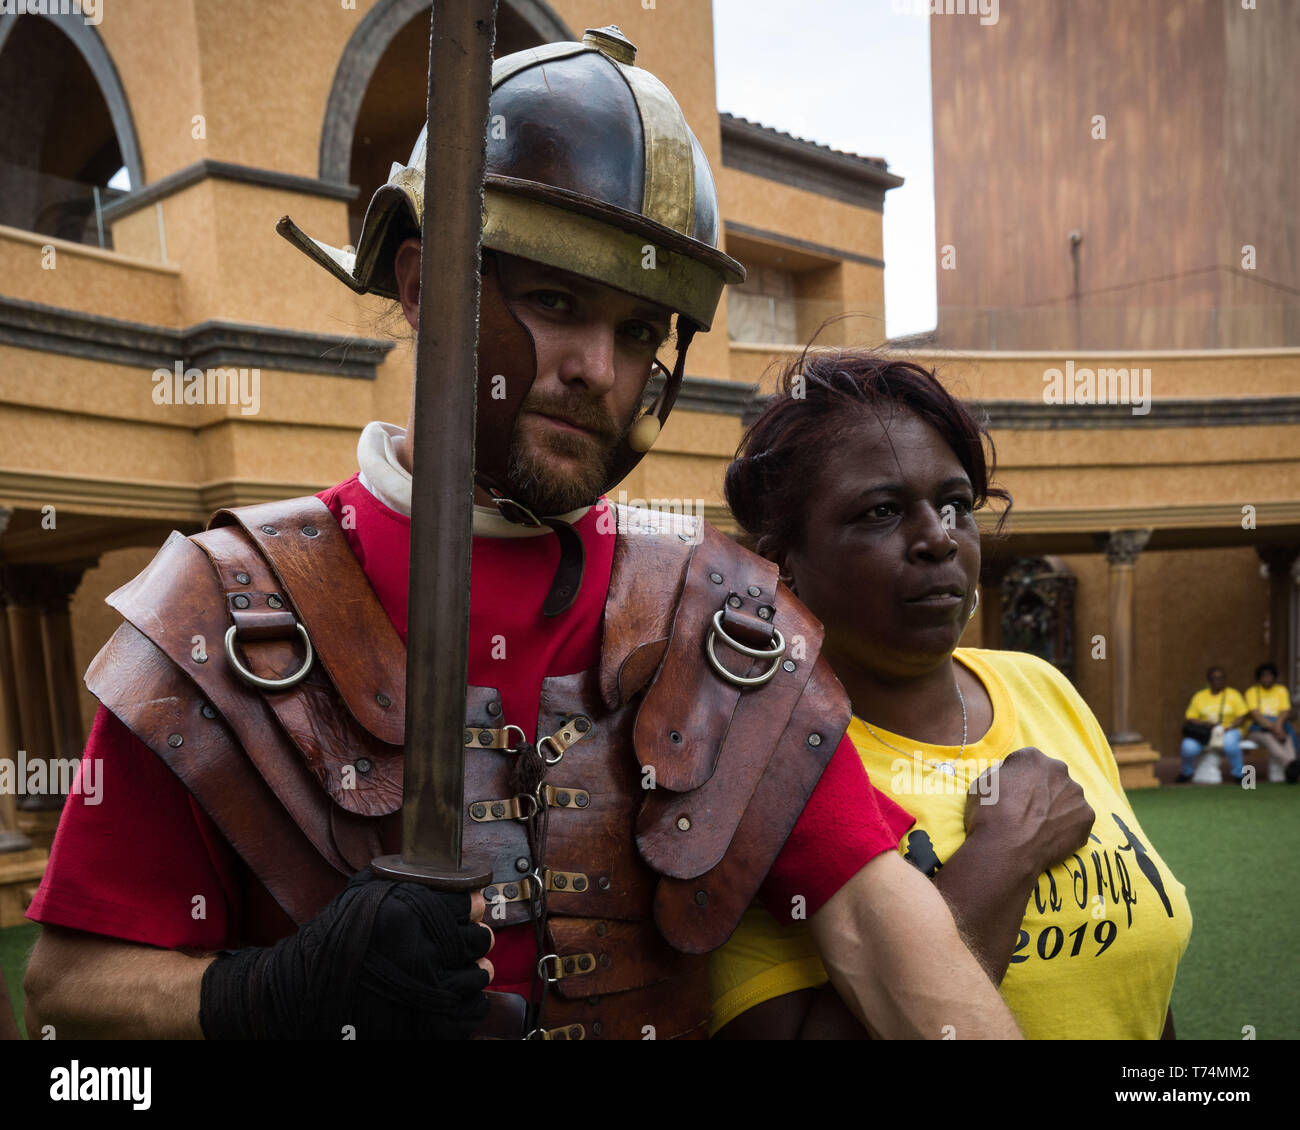 May 3, 2019 - Orlando, Florida, U.S - A woman visiting from South Carolina poses for a photo with an actor after participating in a Roman soldier training camp at The Holy Land Experience (HLE) in Orlando, Florida. The theme park, owned by the Trinity Broadcasting Network, recreates the architecture and themes of the ancient city of Jerusalem in 1st-century Judea. HLE is a non-denominational Christian living biblical museum and church. There are multiple religious-themed live performances given throughout the day in various locations, inside and out. (Credit Image: © Tracy Barbutes/ZUMA Wire) Stock Photo